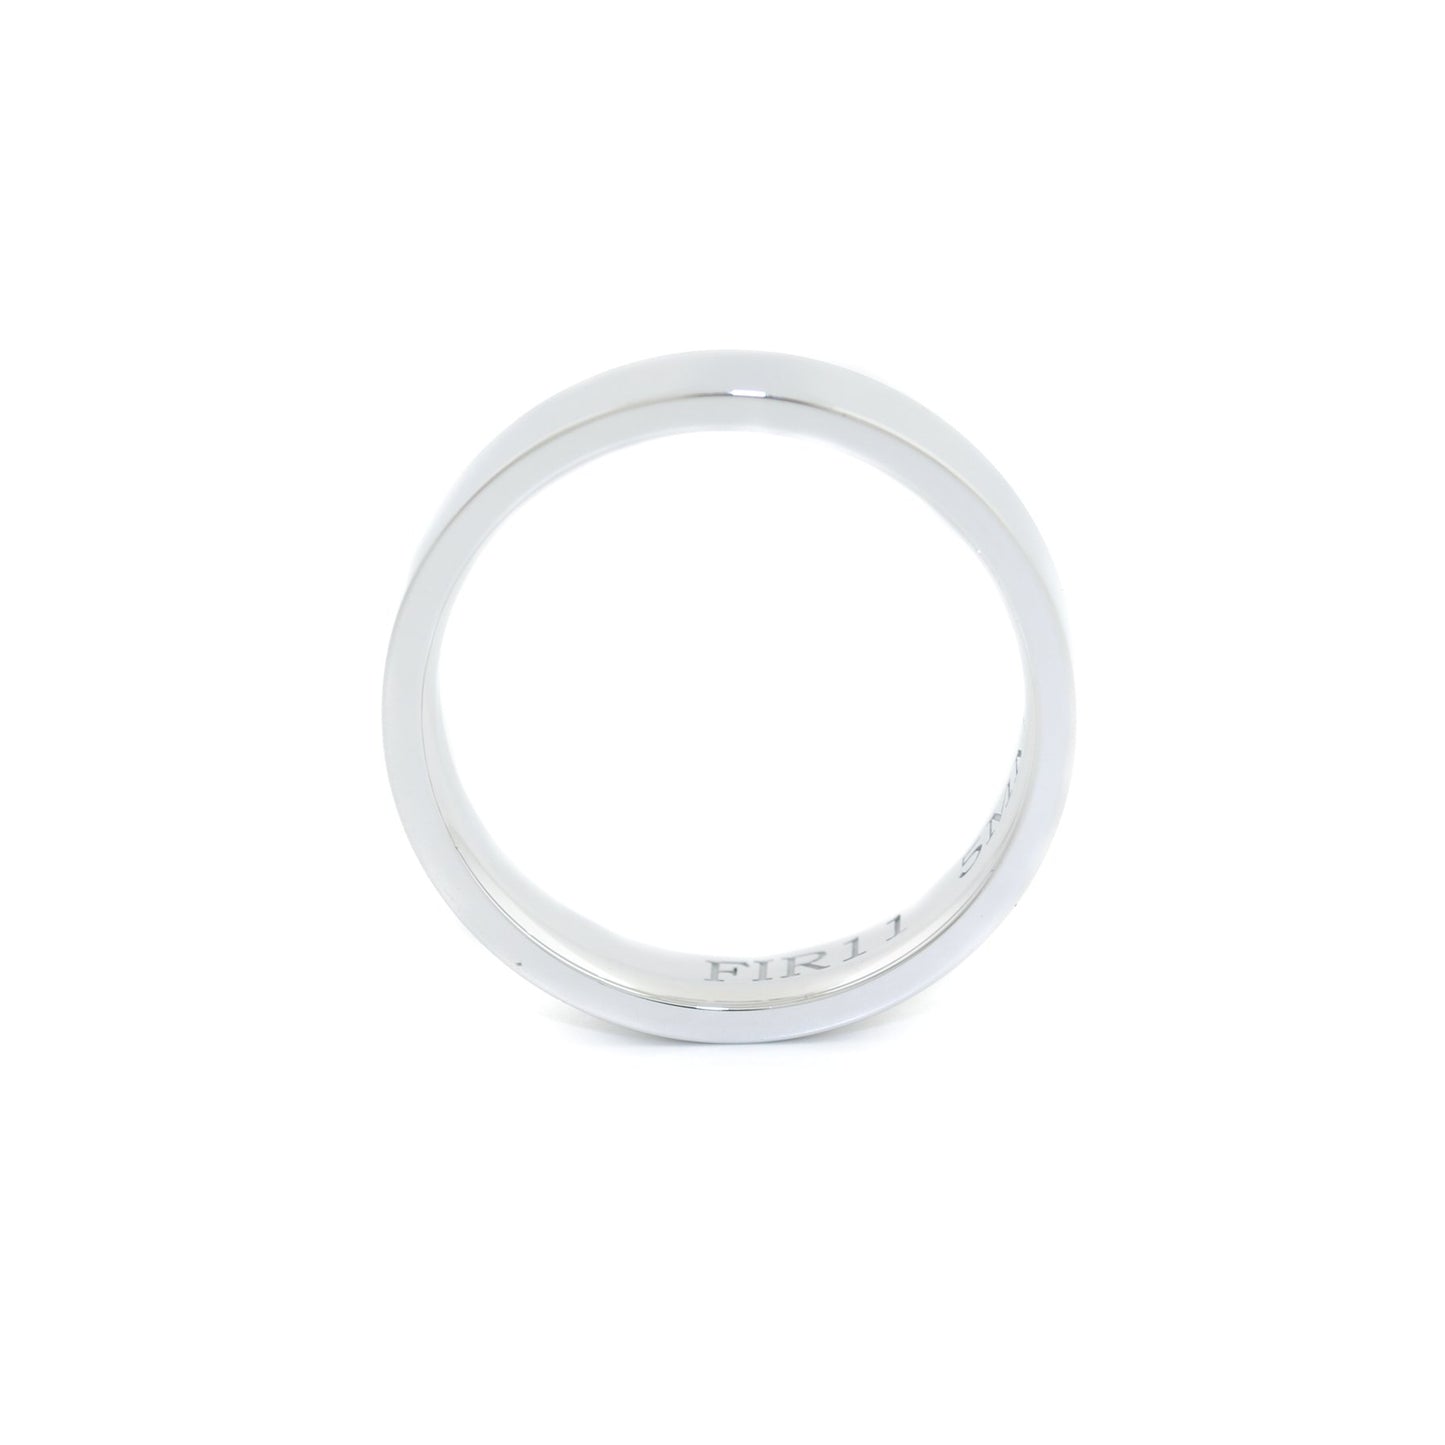 Made to Order: White Gold 5mm Flat Cigar Band - Kingdom Jewelry